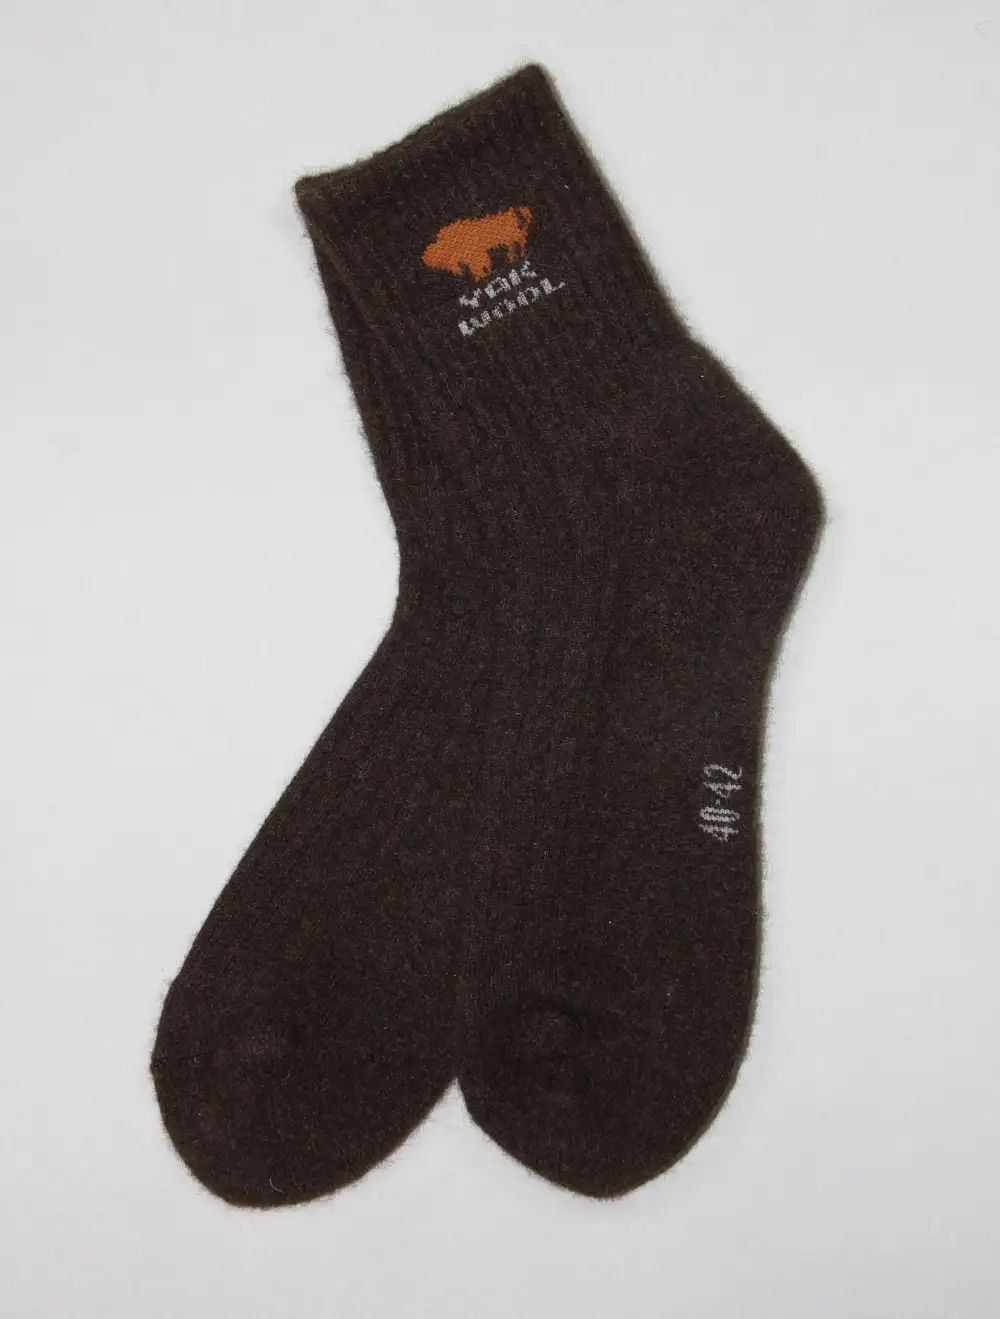 Thick Winter Socks Knitted from Wool with Goat Down Size 7-9 US Warm Wool Socks for Women 